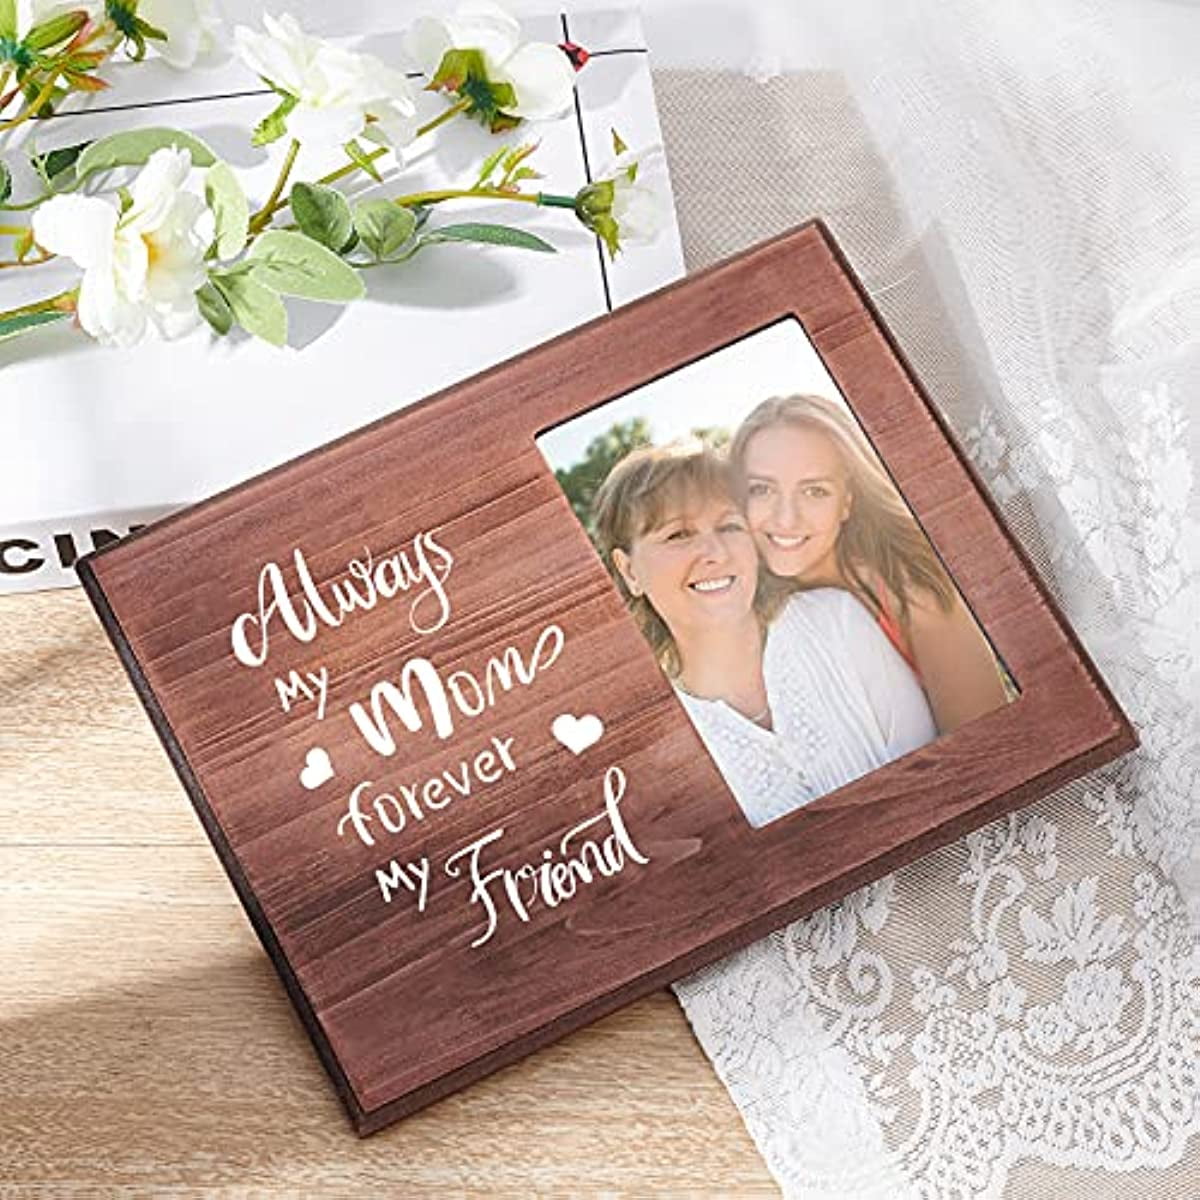 4x6 Metal Wrapped Picture Frame with Rivet Detail